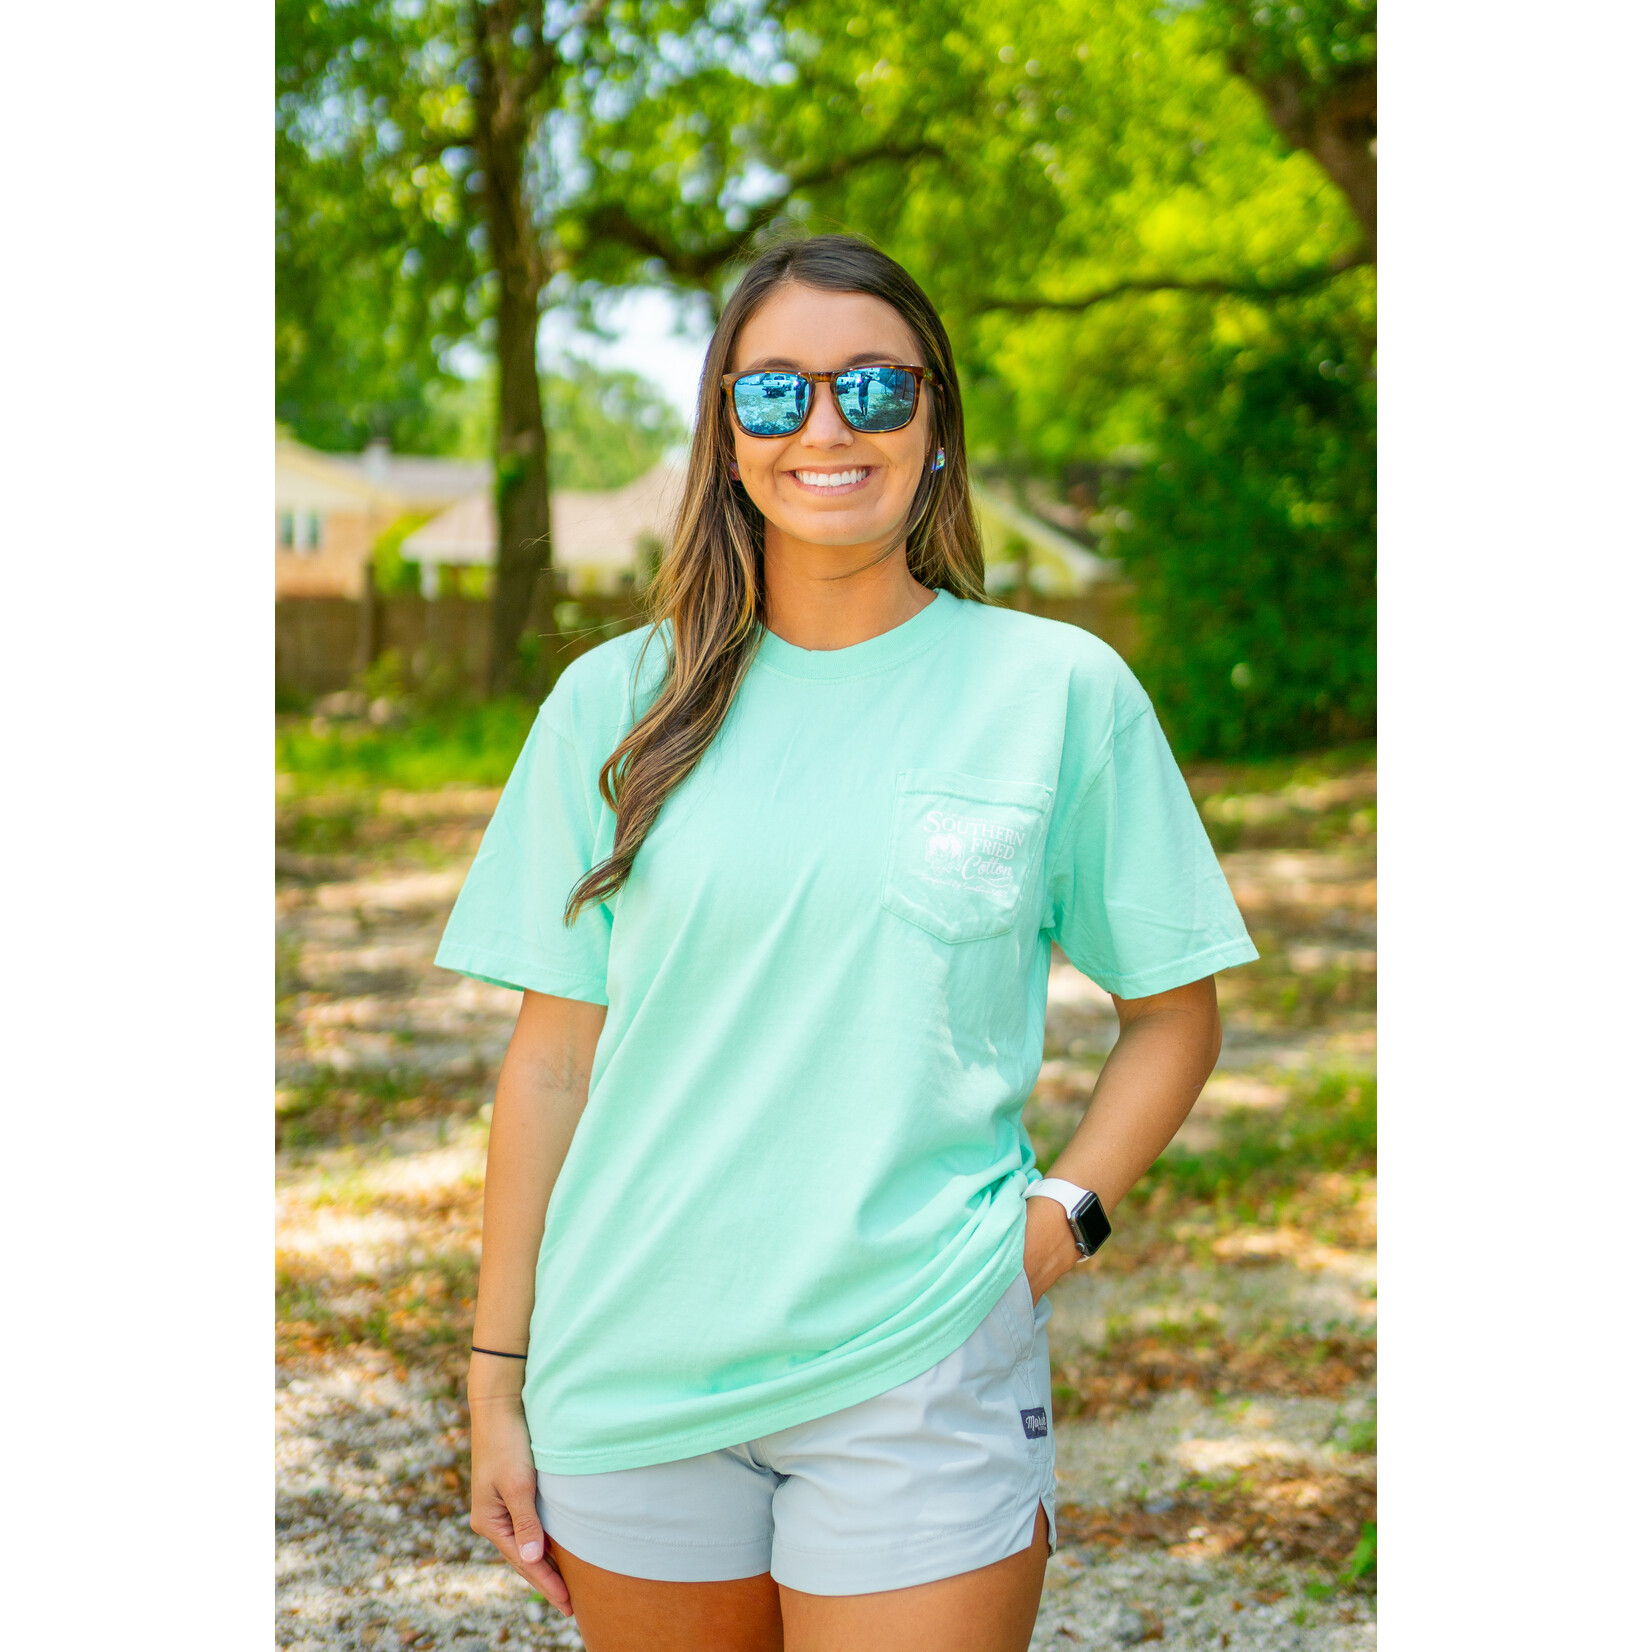 Southern Fried Cotton Southern Fried Cotton Women's Southern Small Town S/S TEE Shirt